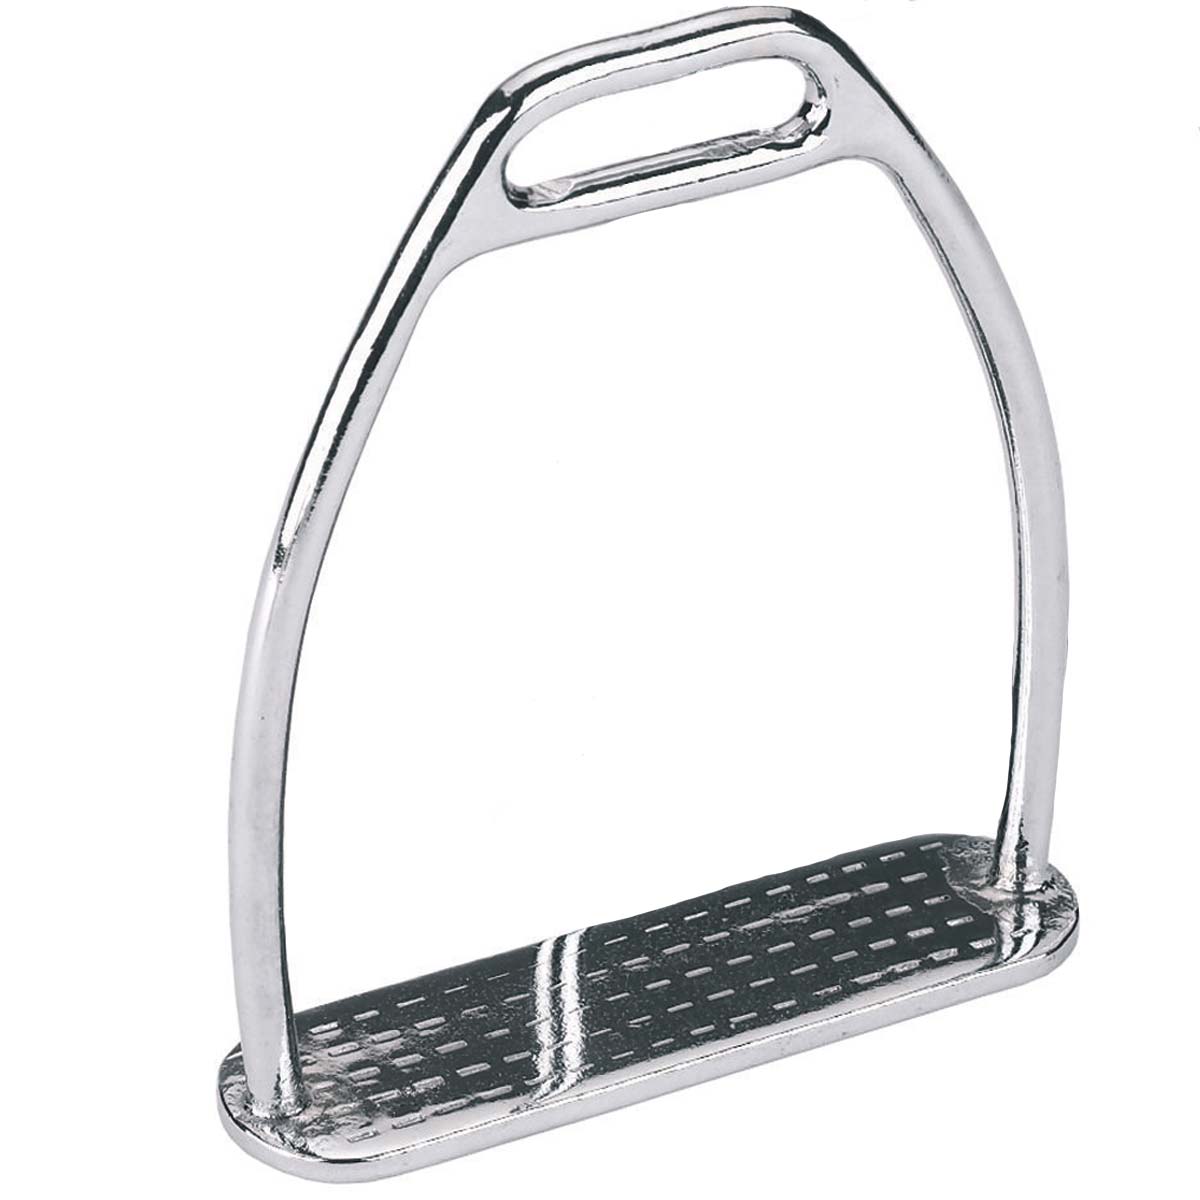 Stirrup for kids stainless steel